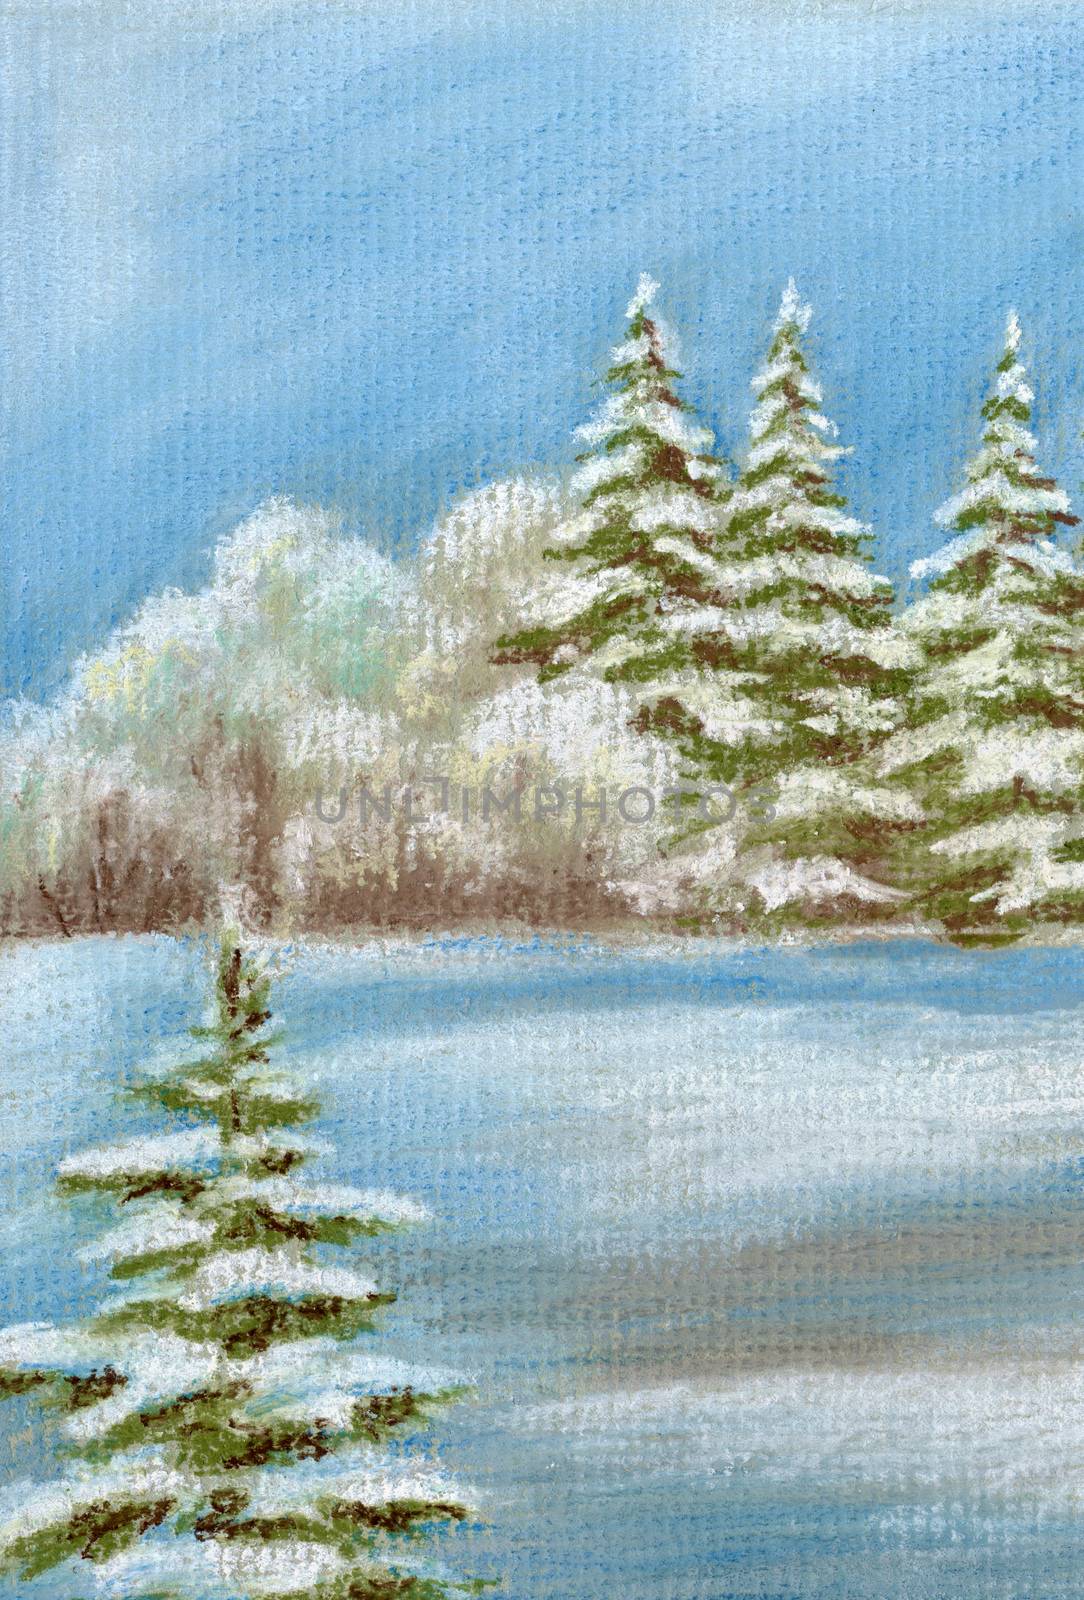 Painting, winter forest by alexcoolok